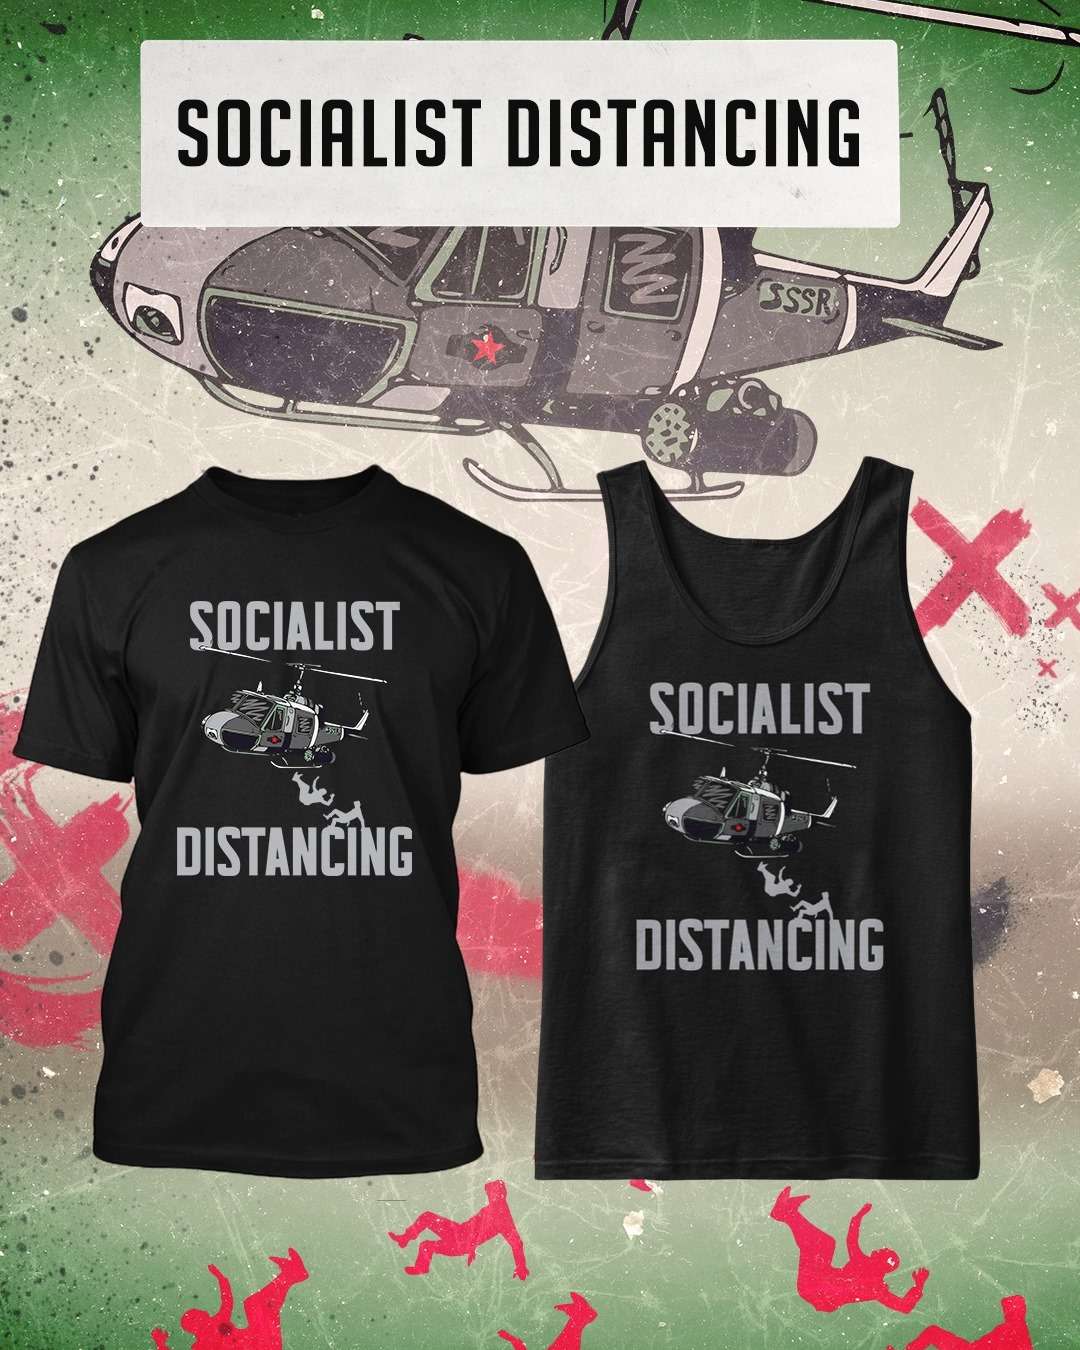 Socialist distancing - Falling from Helicopter